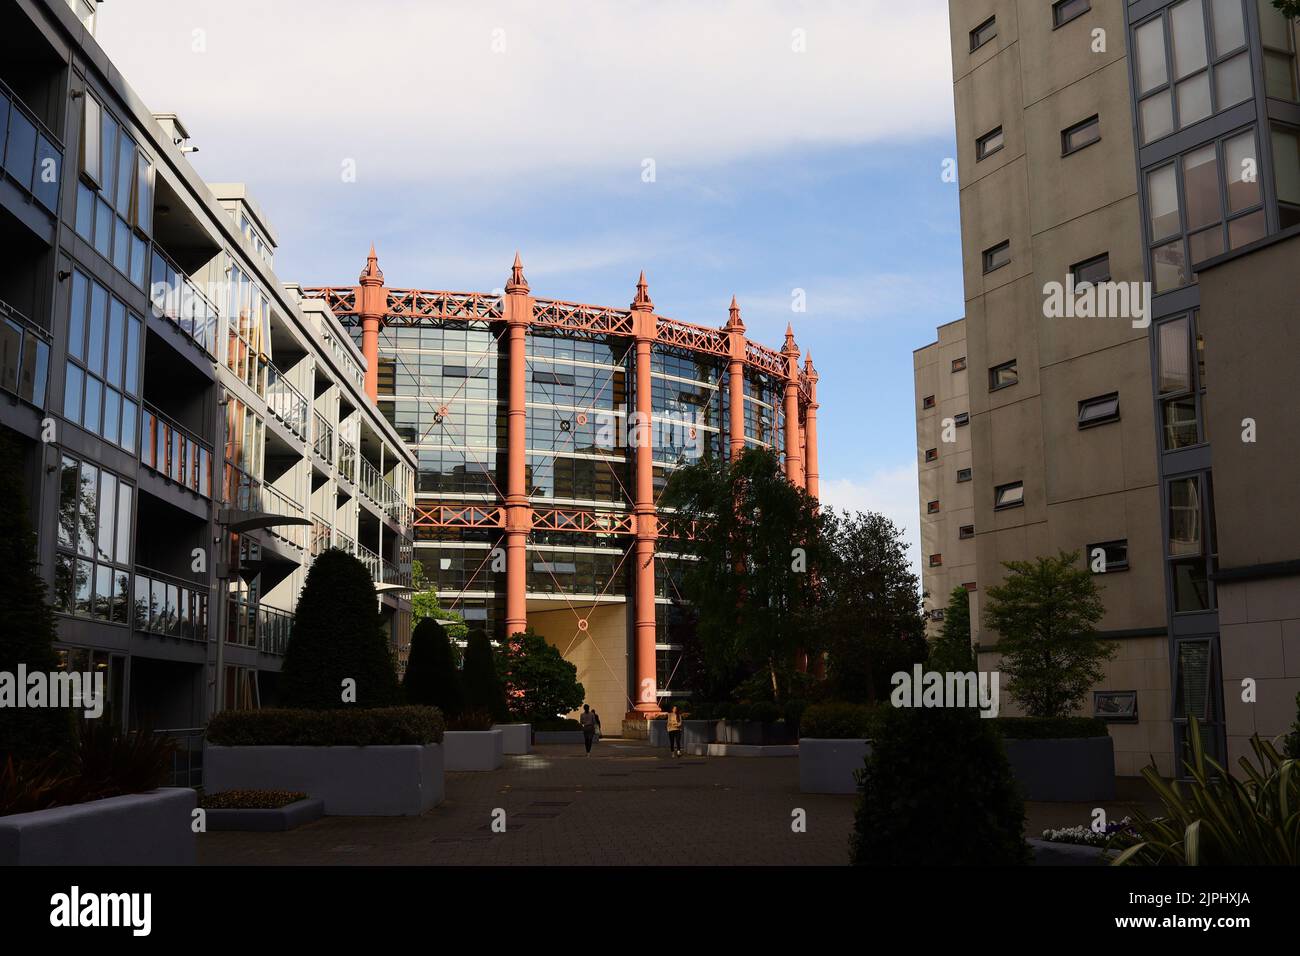 A view of the modern city plaza with the Gasworks apartments in Dublin, Ireland Stock Photo